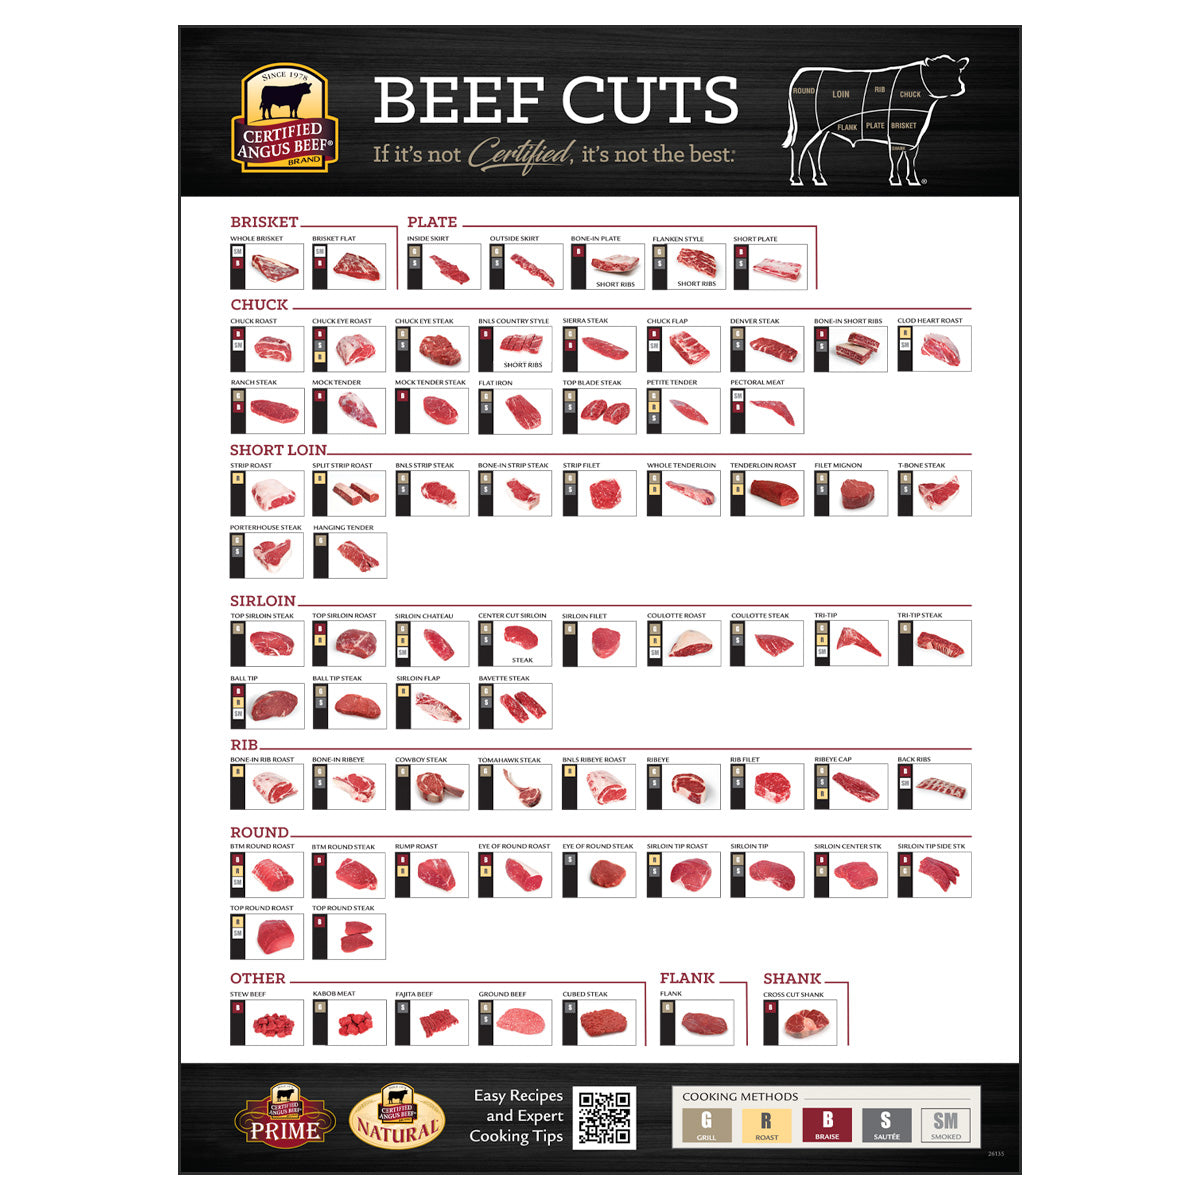 Retail Poster - BEEF CUTS